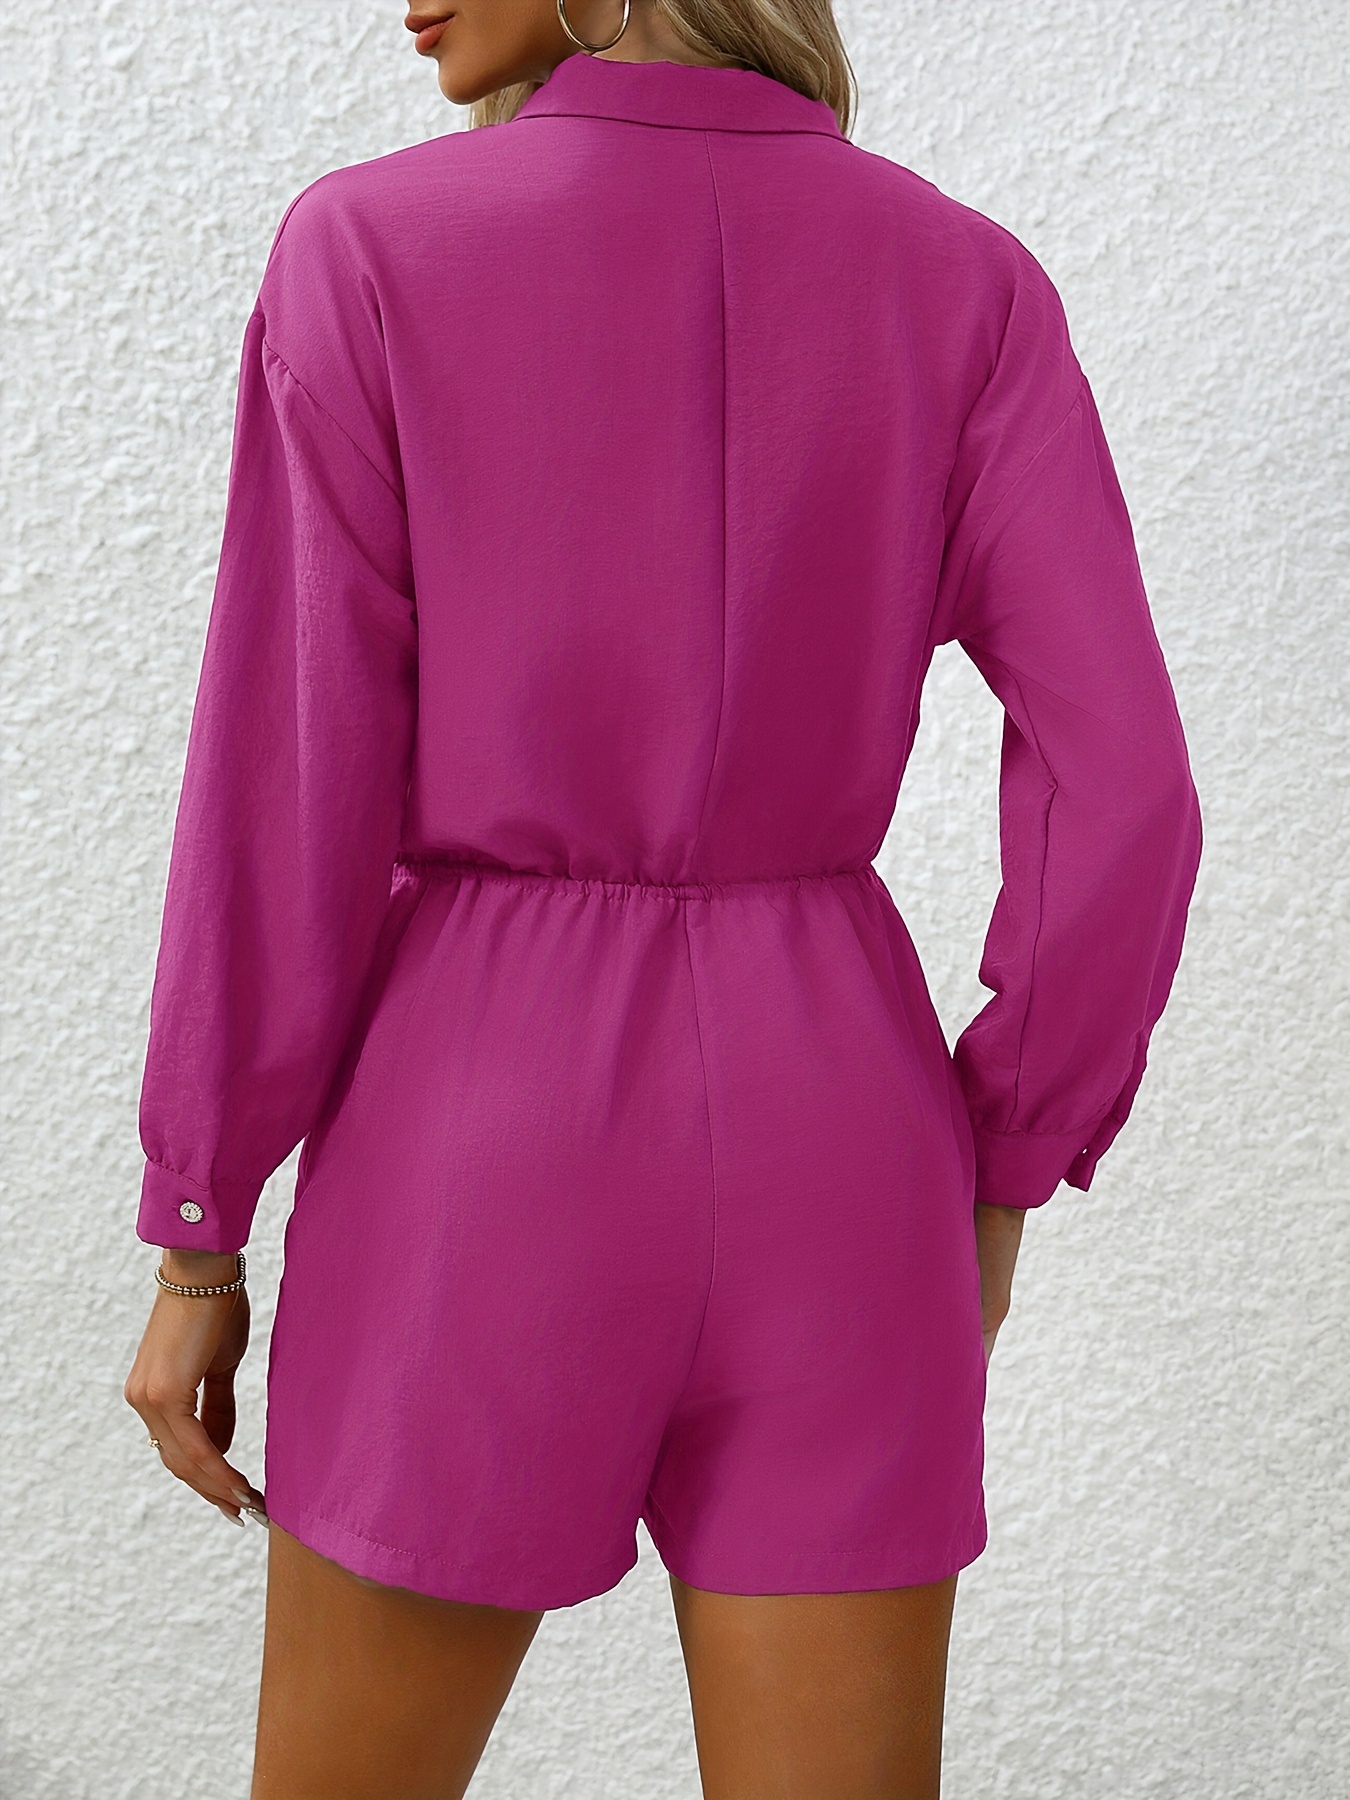 Hot Pink Long Sleeve Romper With Pockets